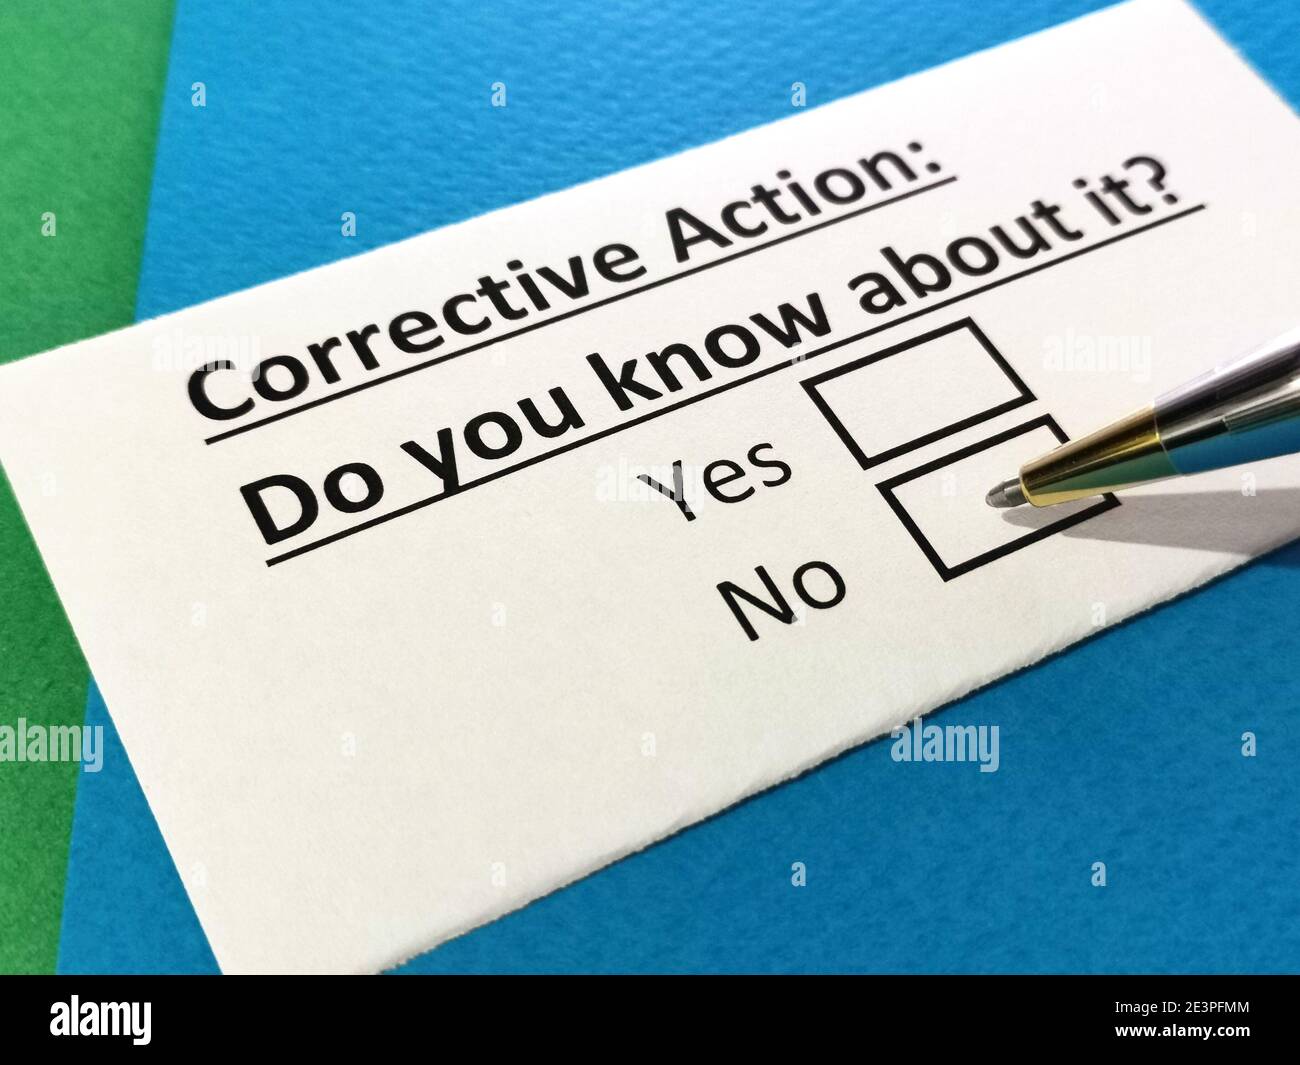 One person is answering question about correective action. Stock Photo